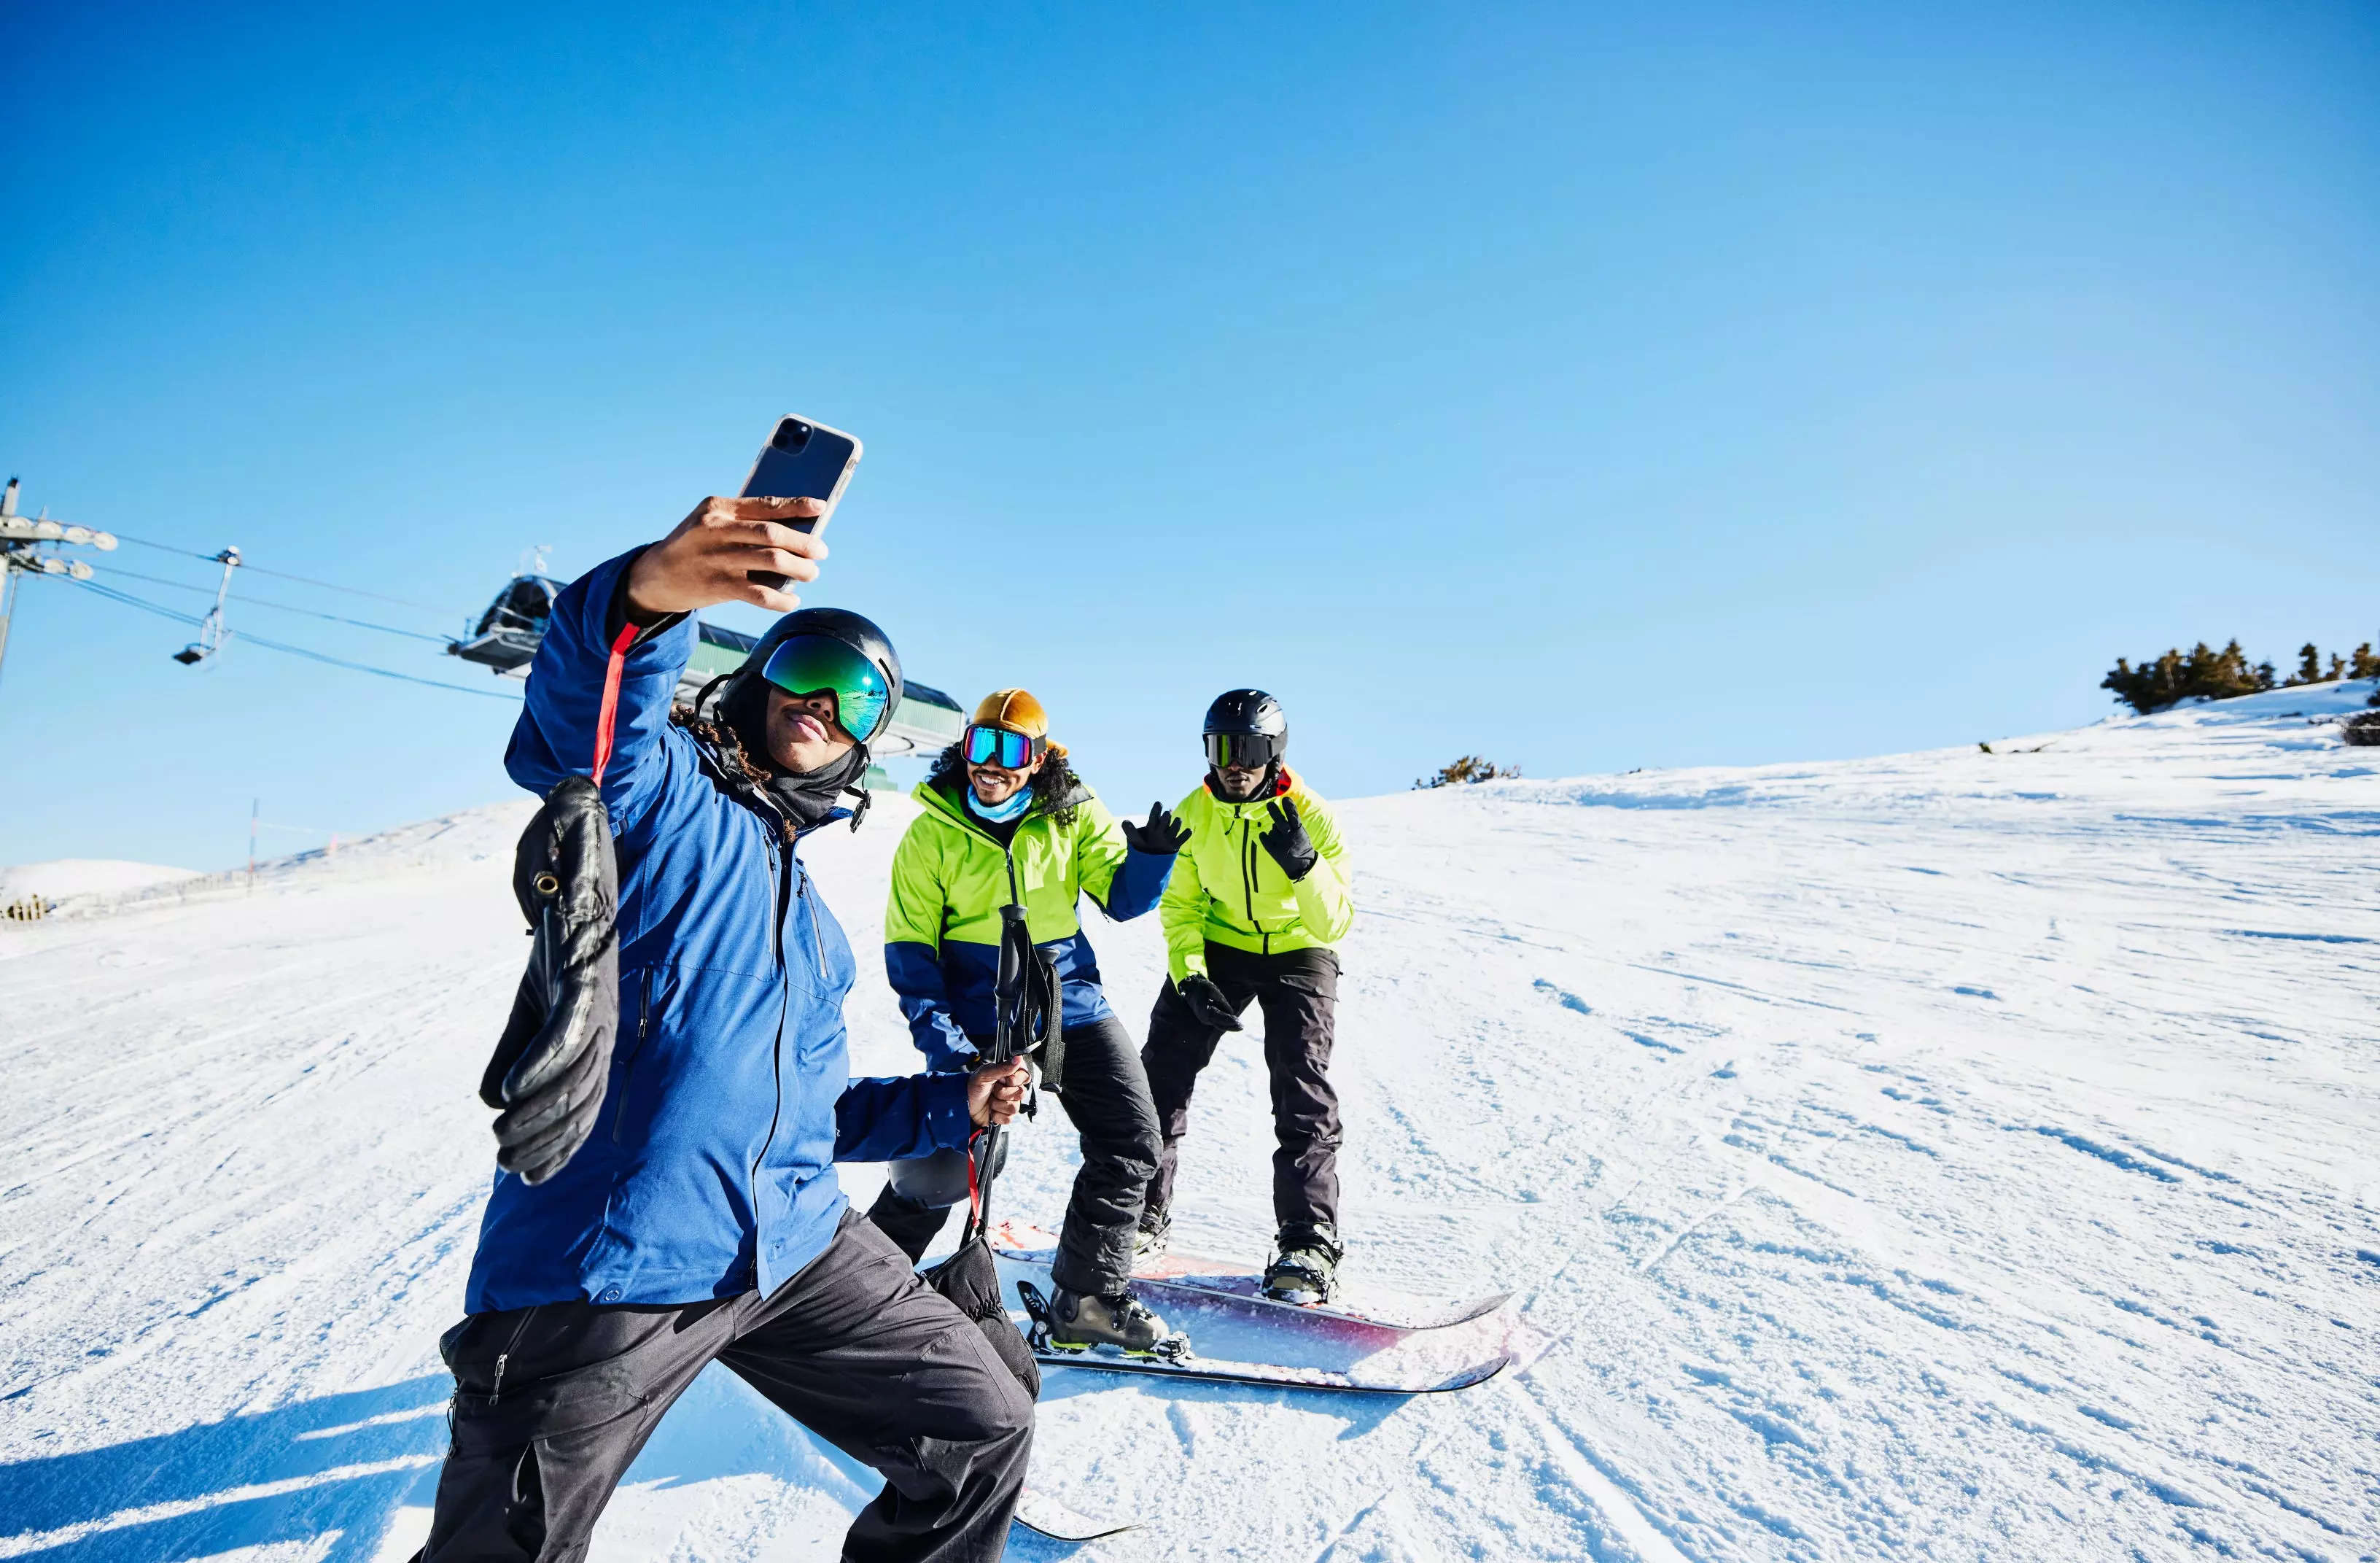 People taking a selfie while snowboarding on a mountain.